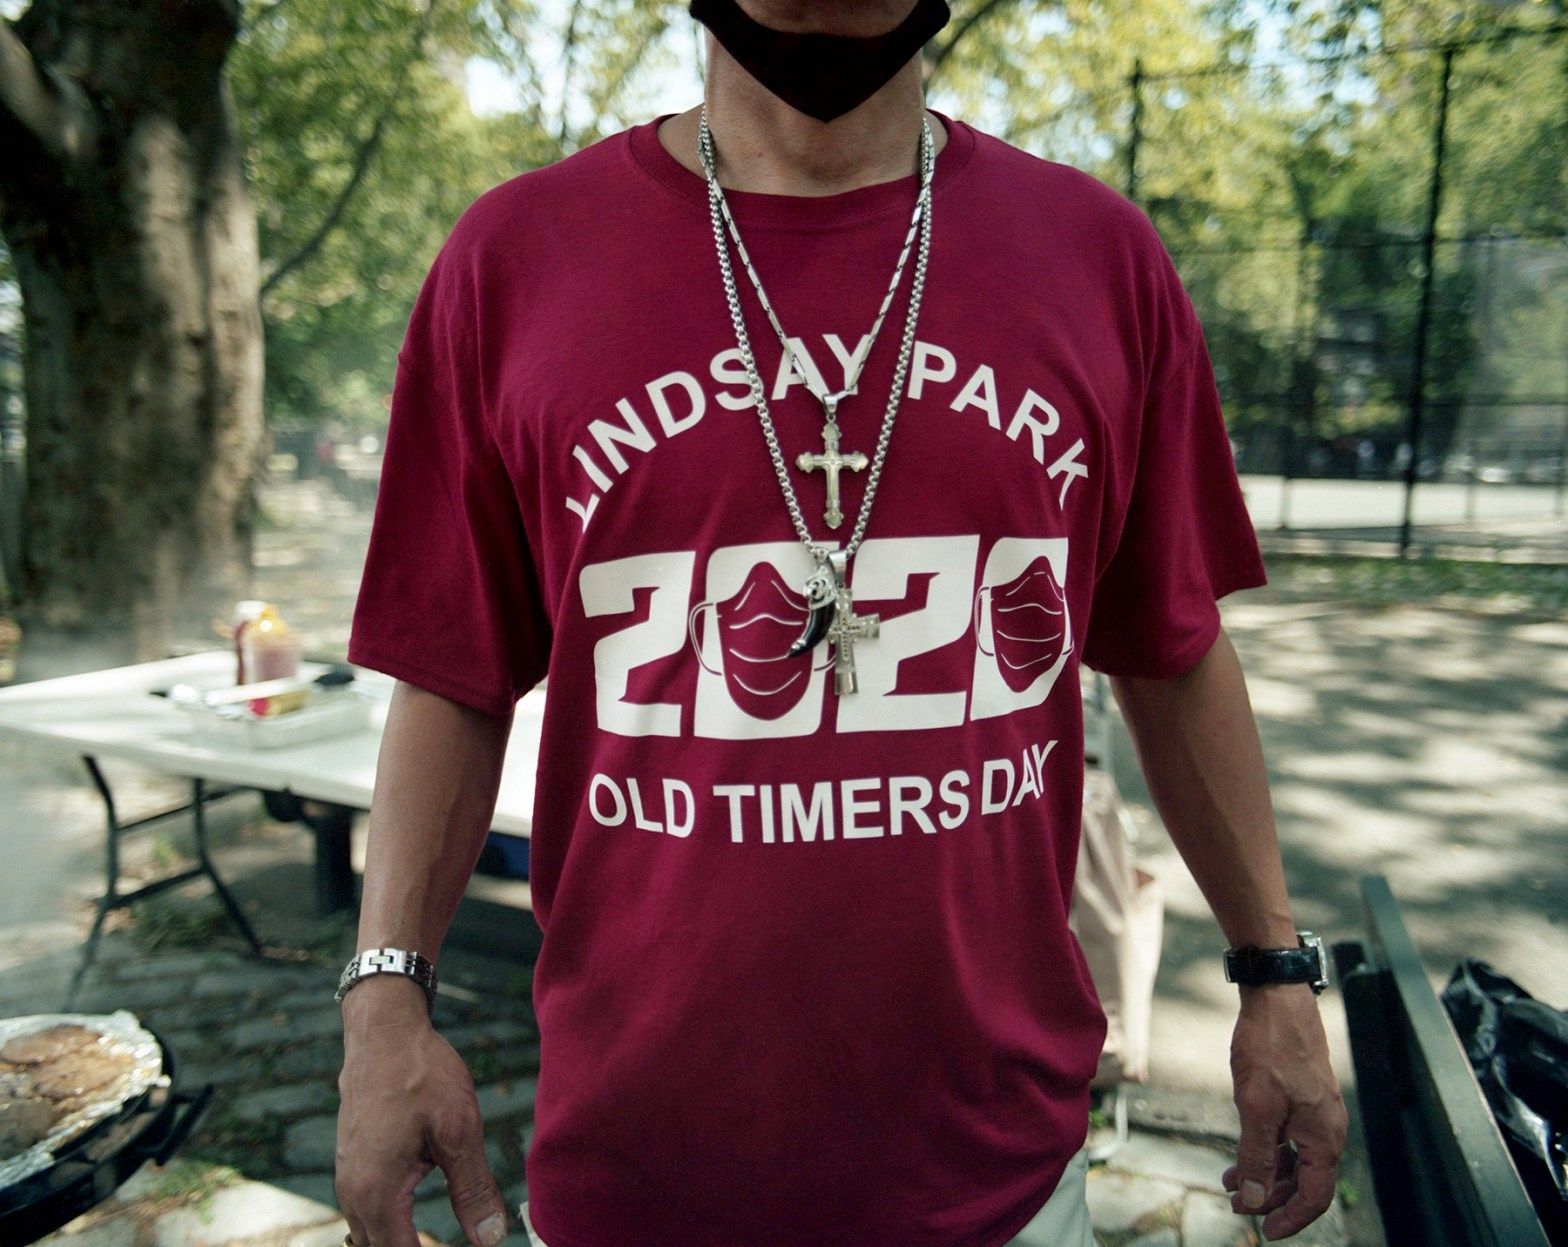 “Lindsay Park Old Timers 2020 Annual Reunion.” Image by Mateo Ruiz González. United States, 2020.